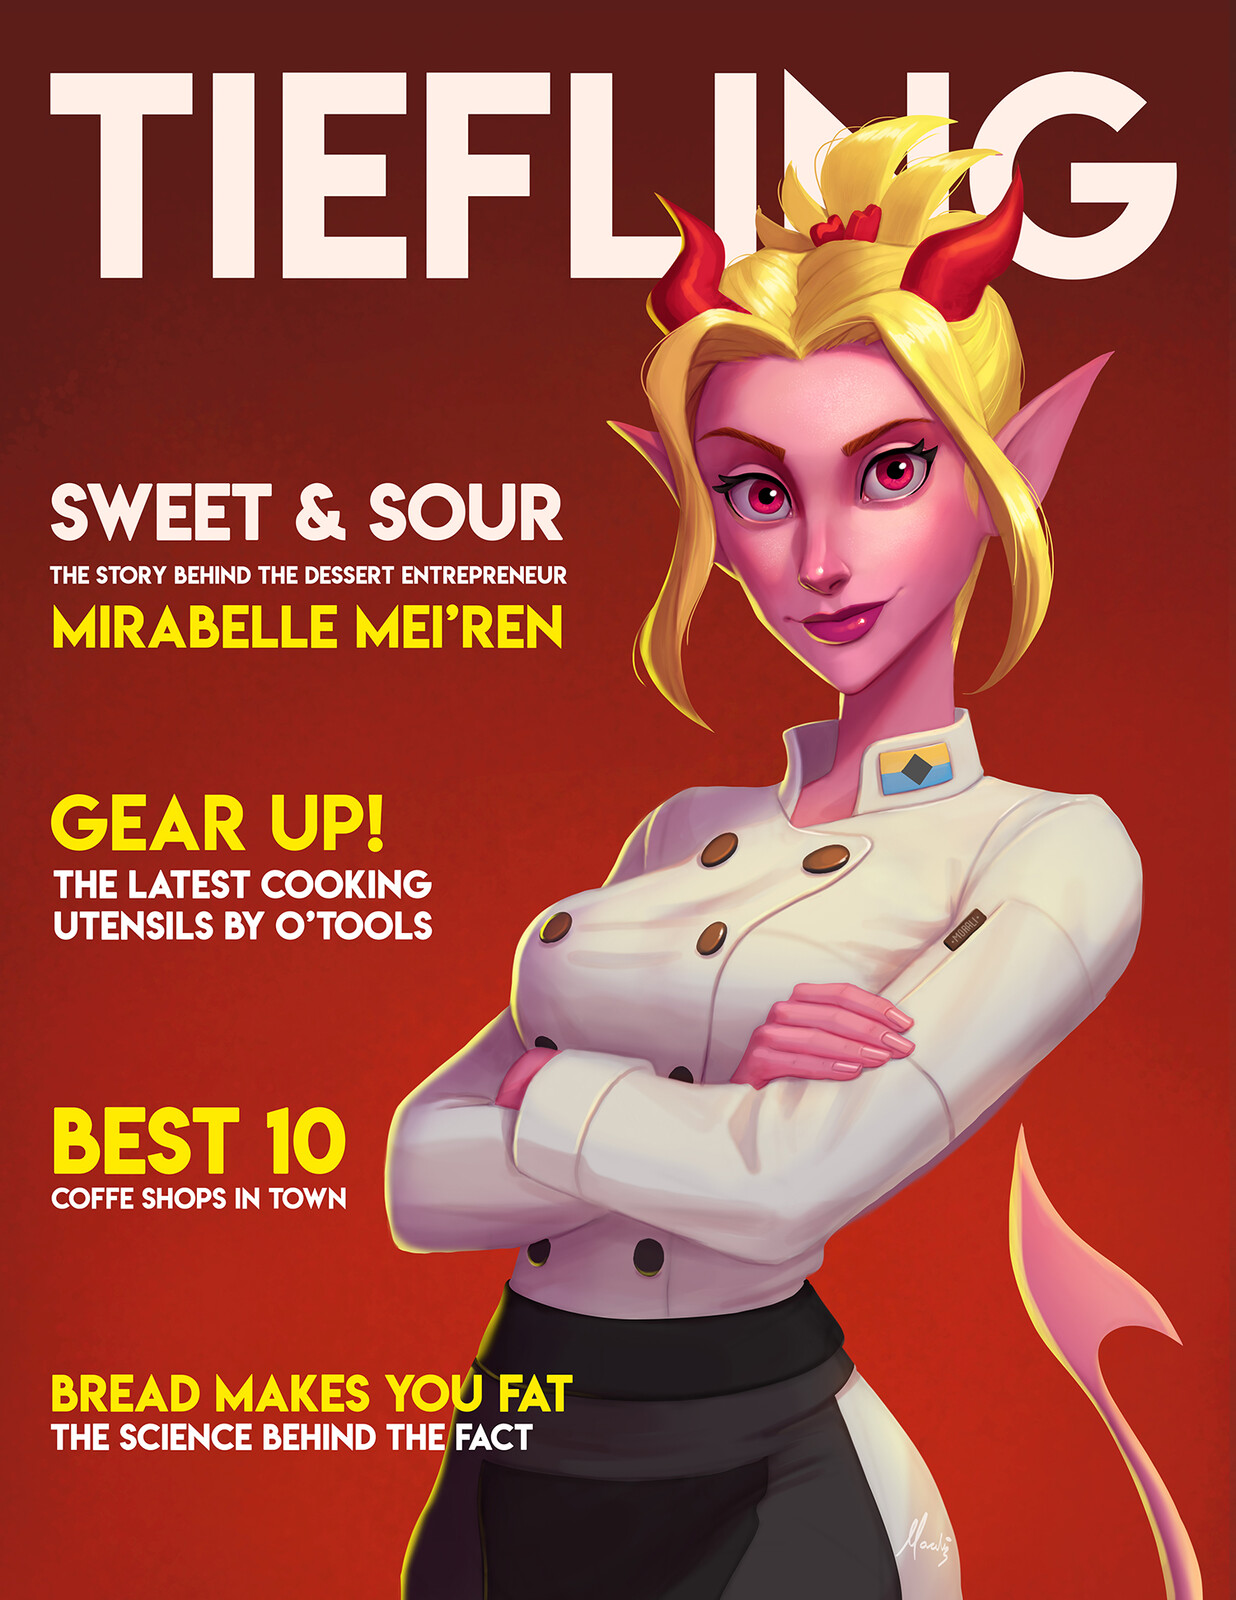 Mirabelle on the Tiefling Mag Cover, after 10 years when she reached her dream of becoming a chef